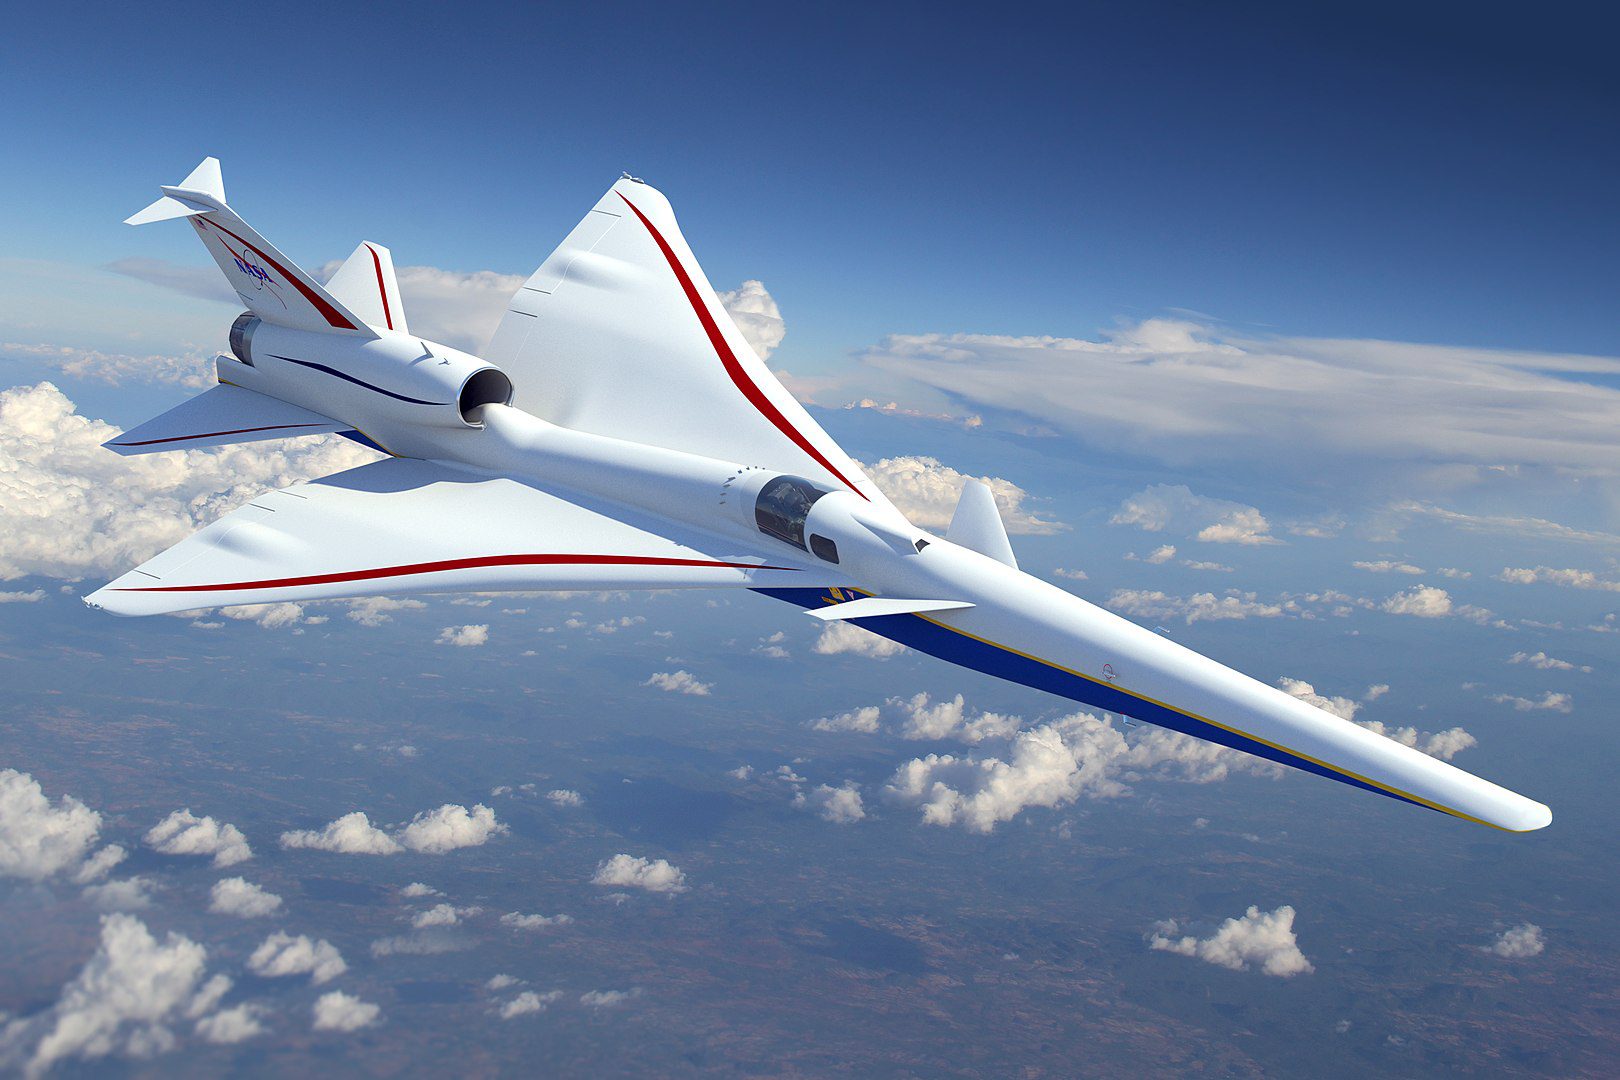 NASA:s X-59 QueSST: Towards a Favored Return to Supersonic Airplanes?